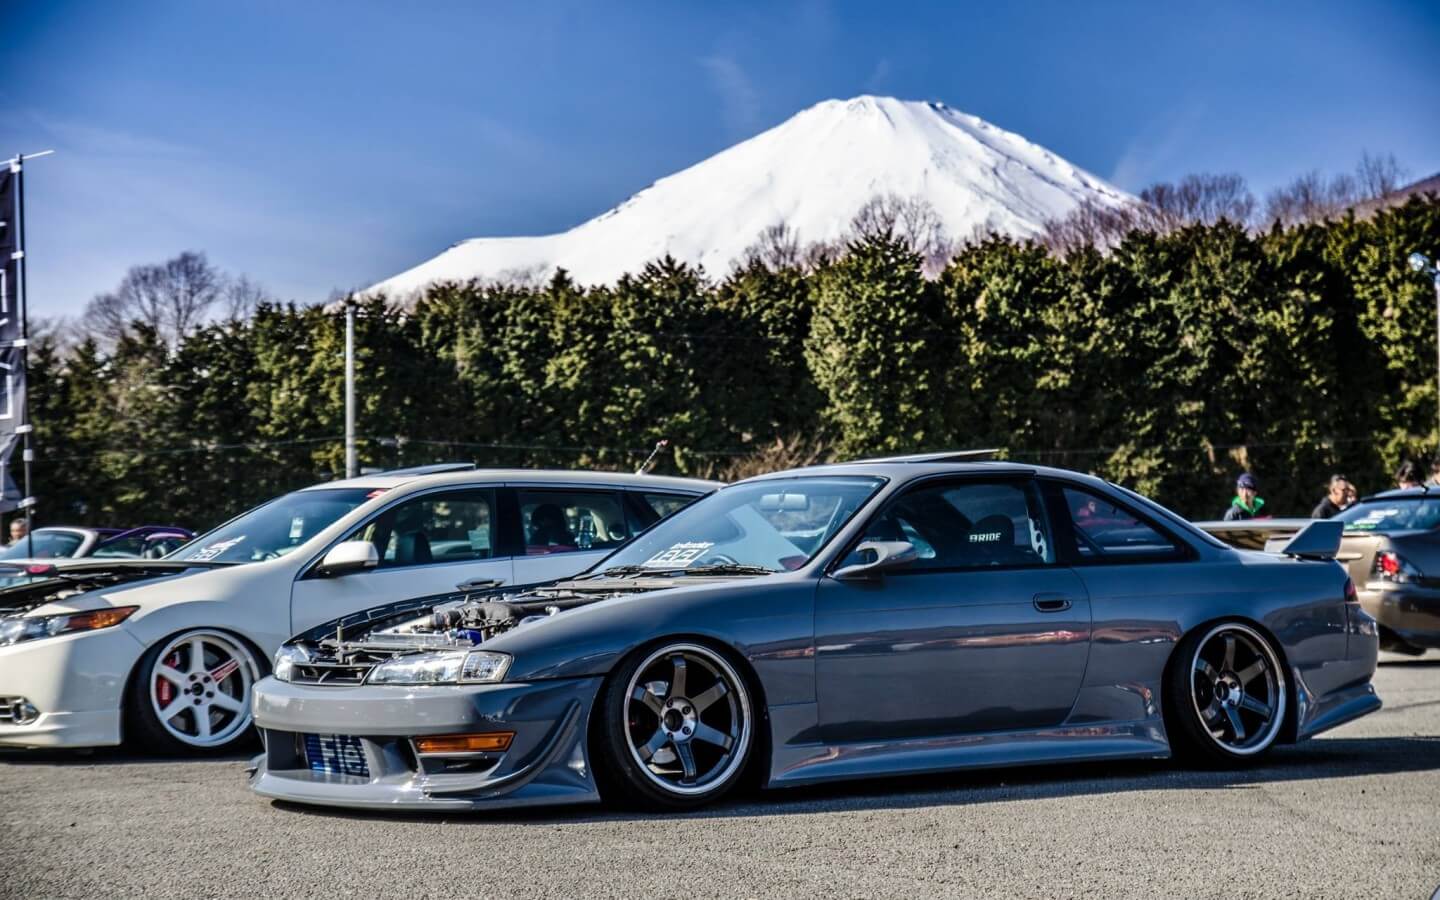 Nissan Silvia S14 Wallpaper Coches Japoneses